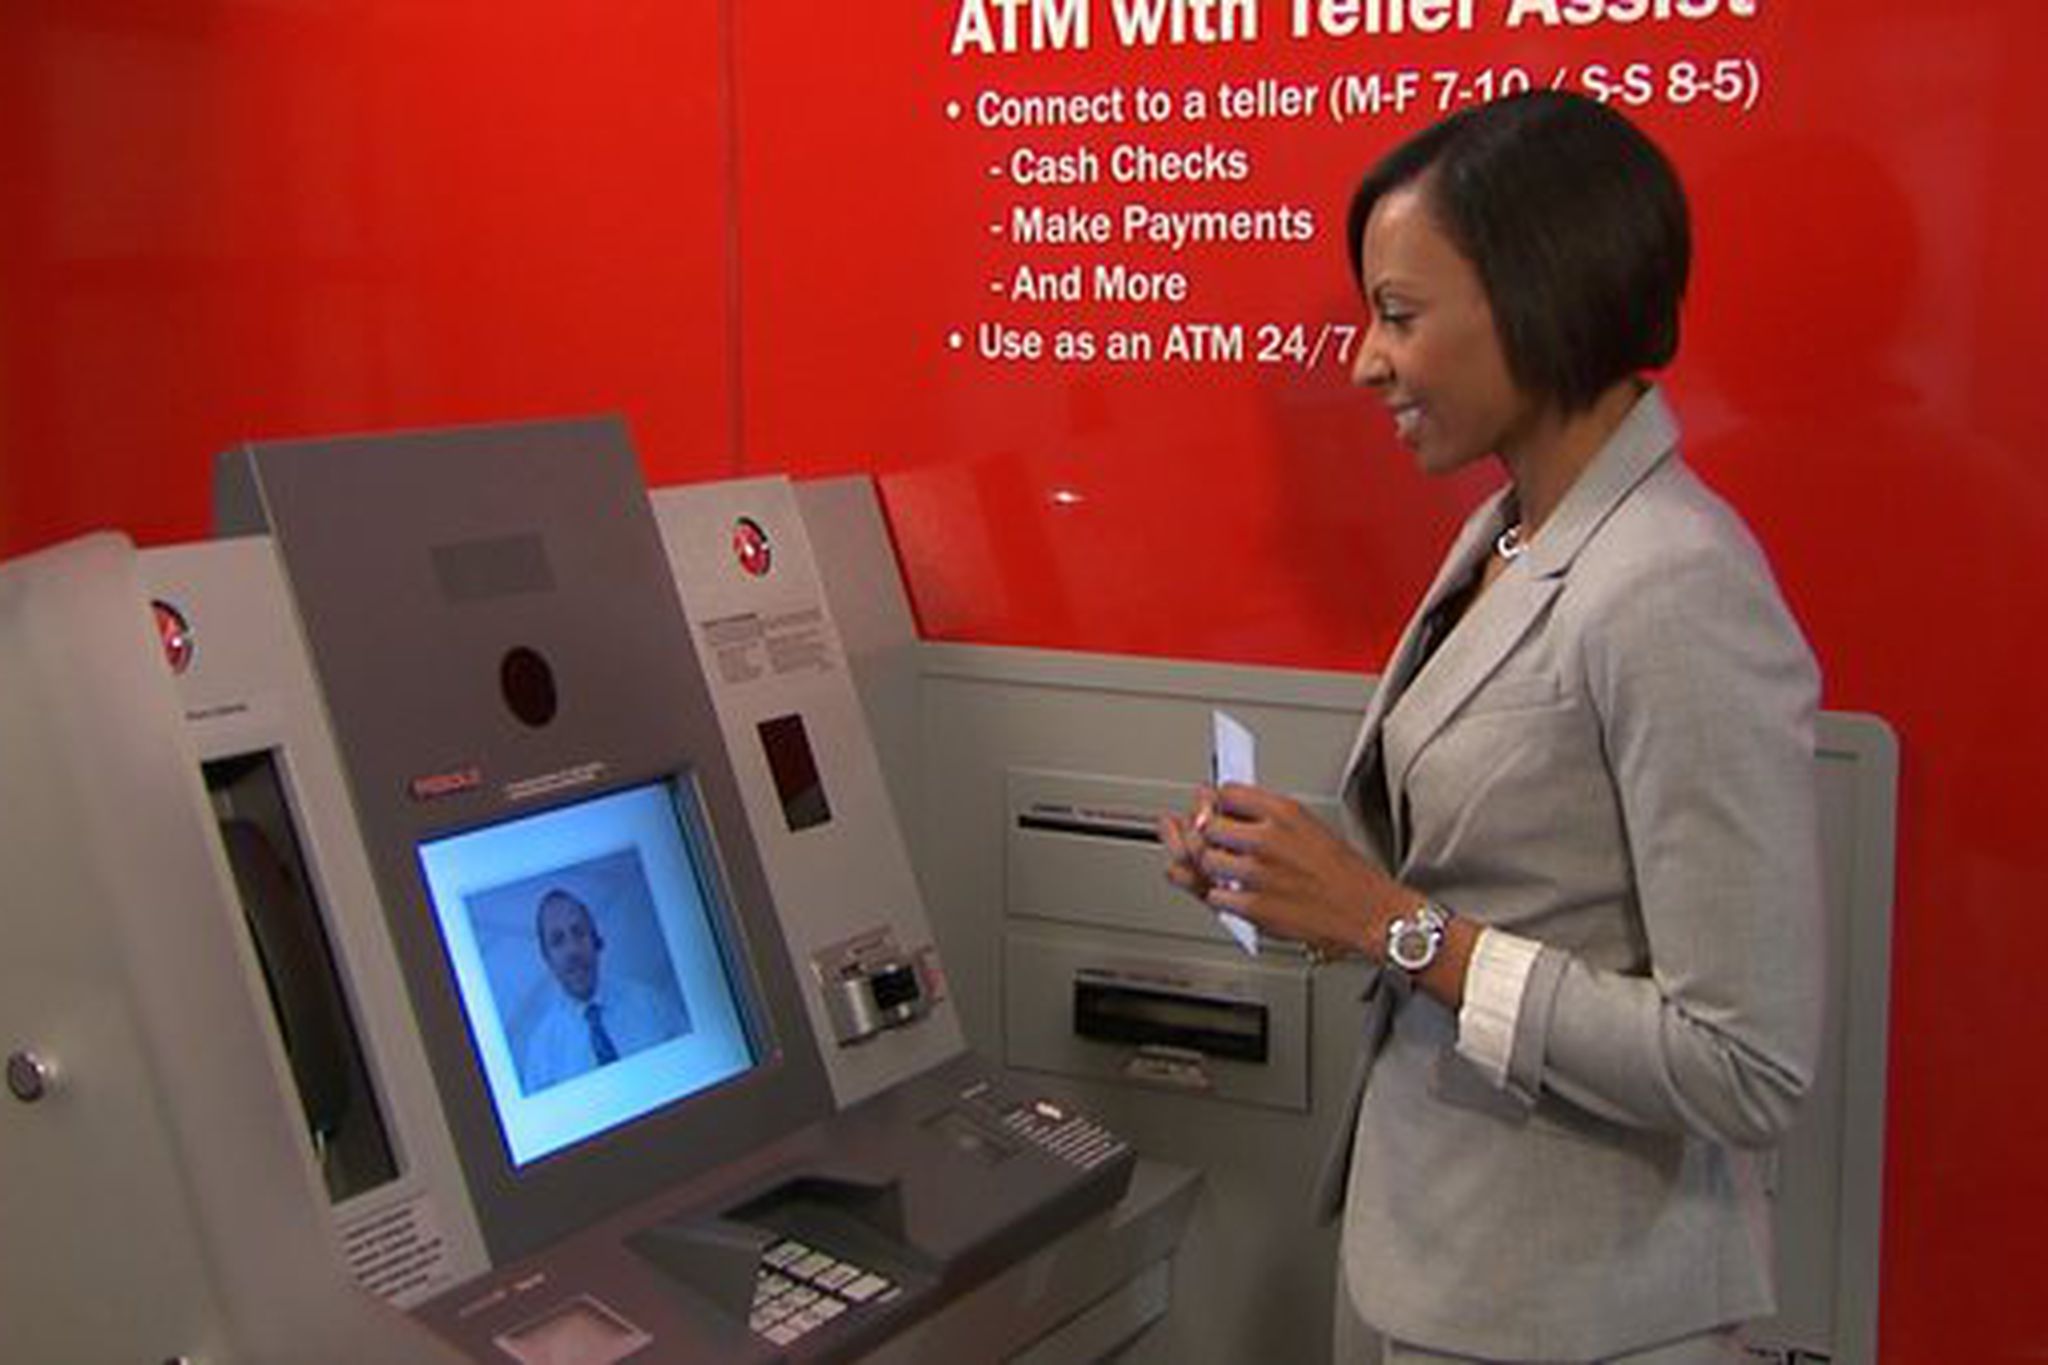 Bank Of America Launches Atms With Teller Assist Brings Video Chat To